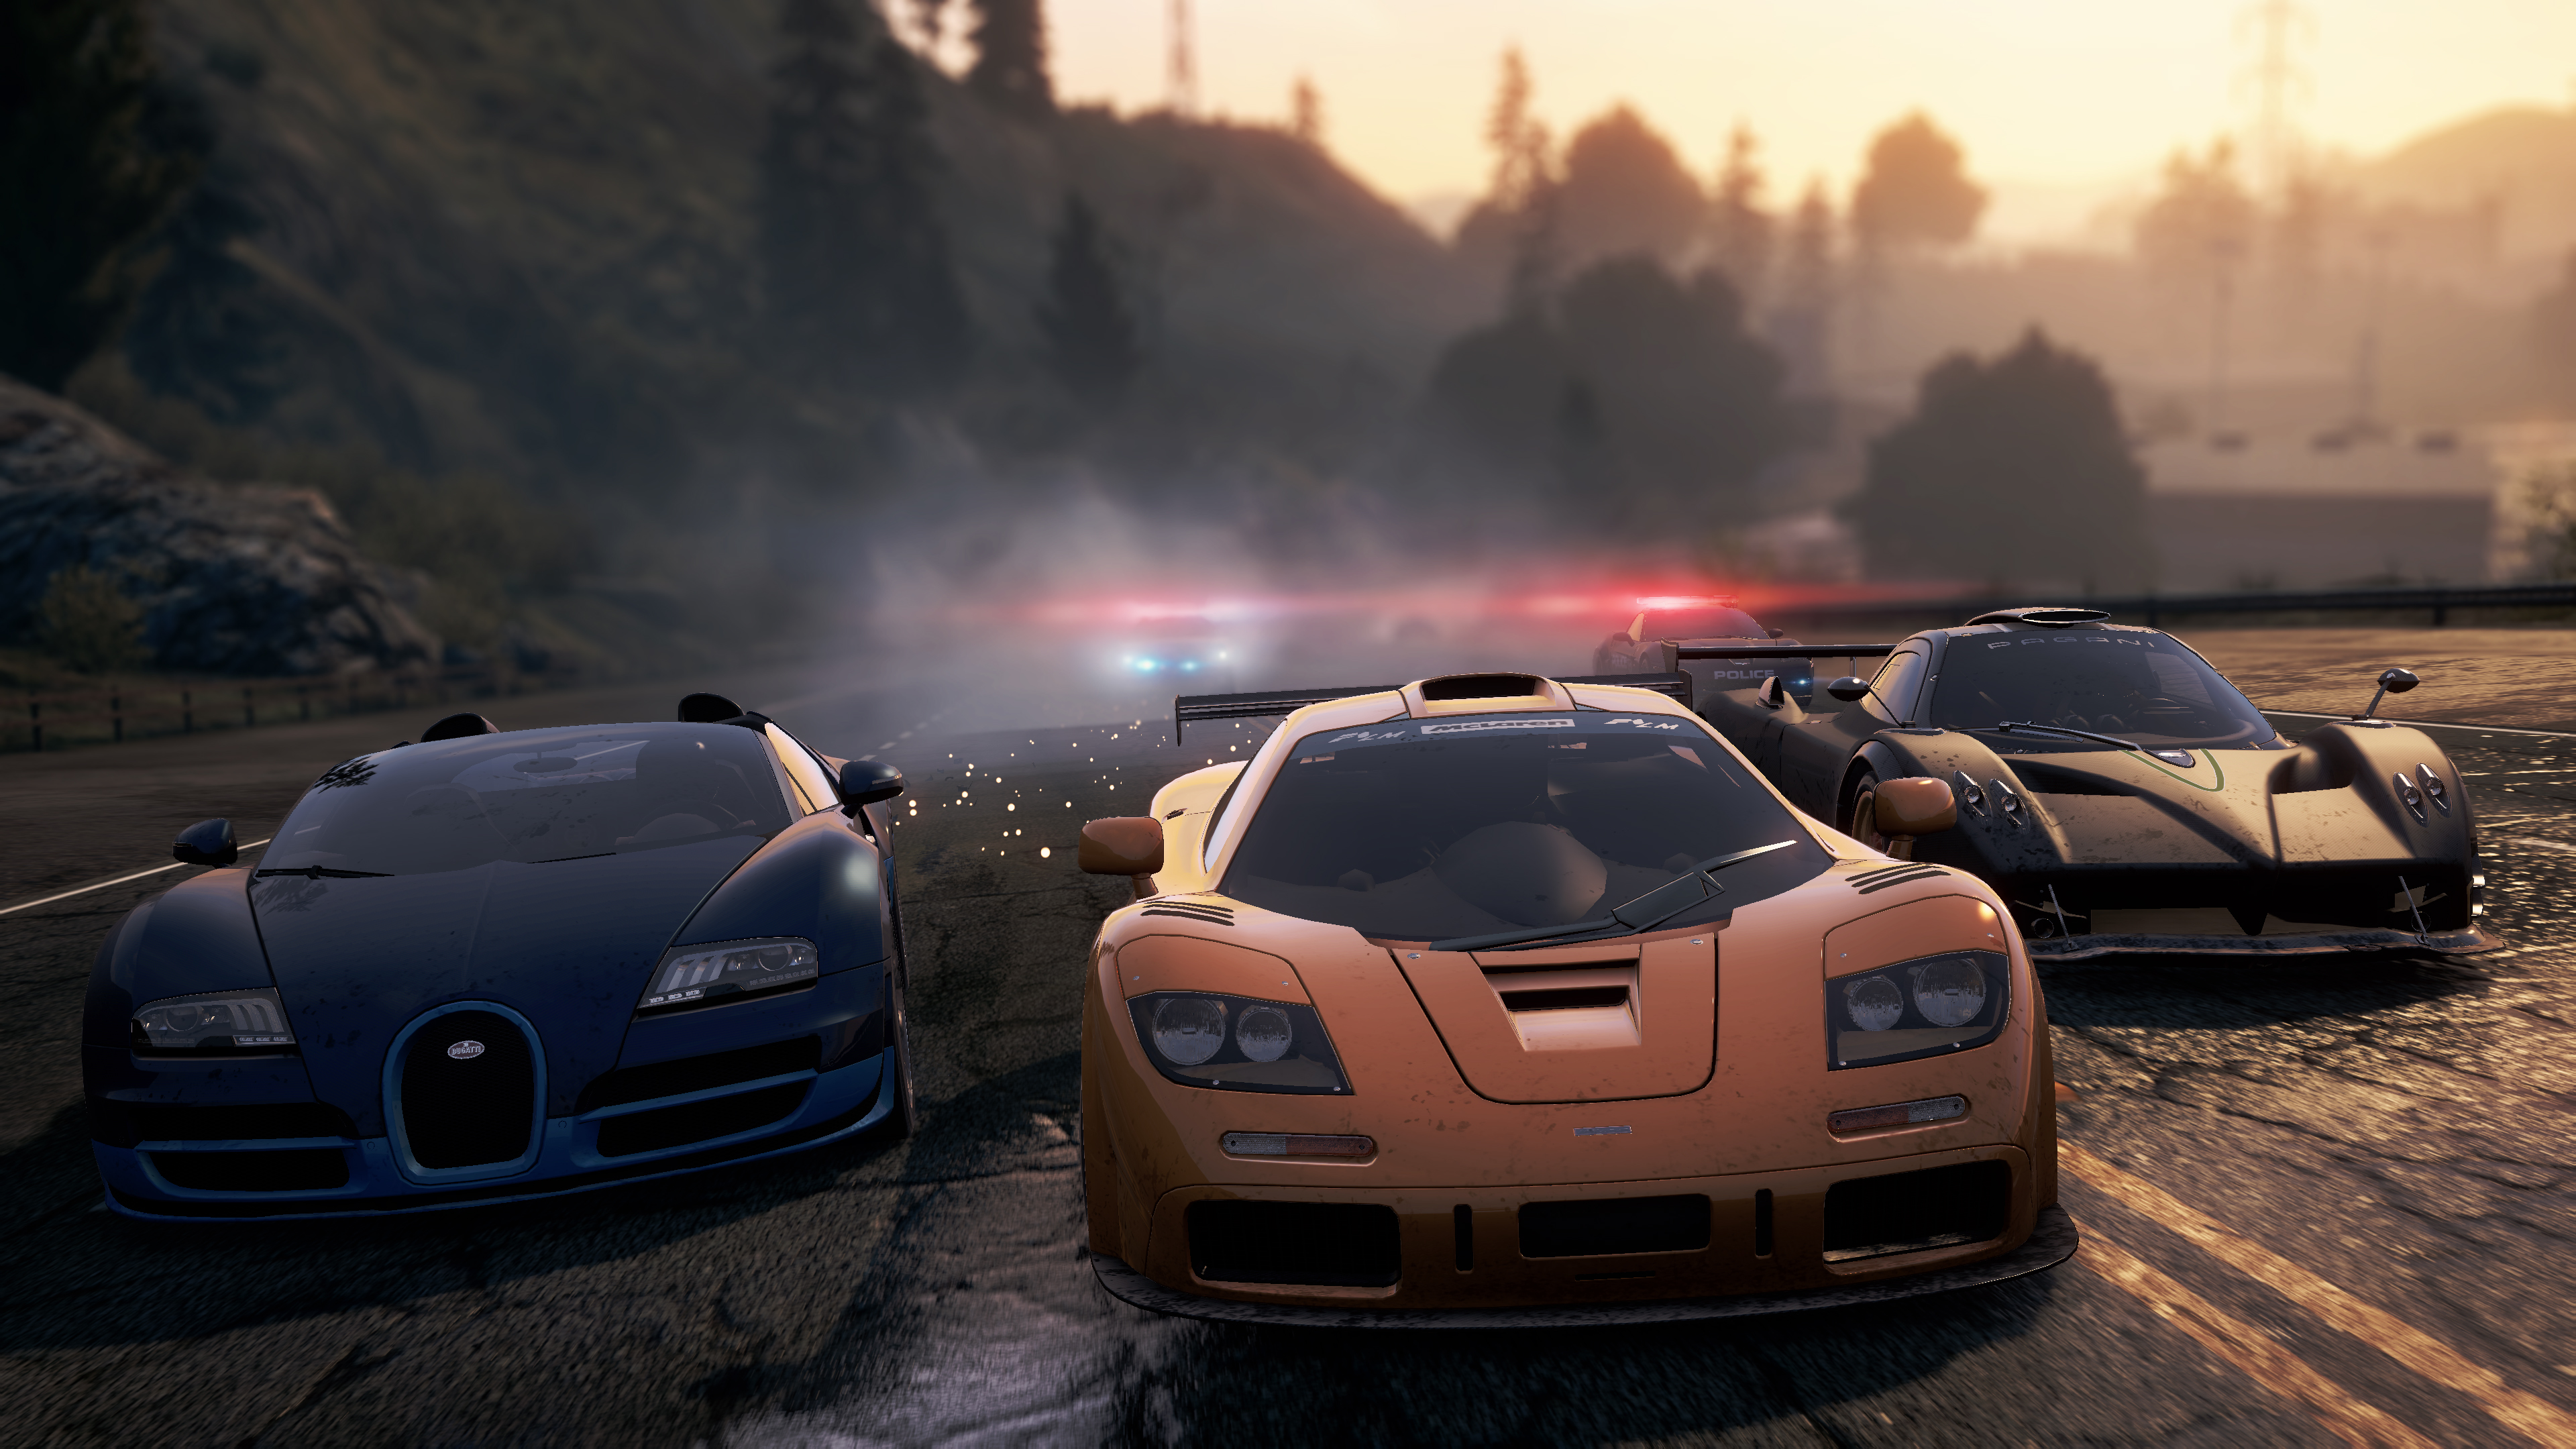 Need for speed wanted game. Need for Speed 2022. NFS most wanted. Need for Speed most wanted 2012. Нфс 2022 геймплей.